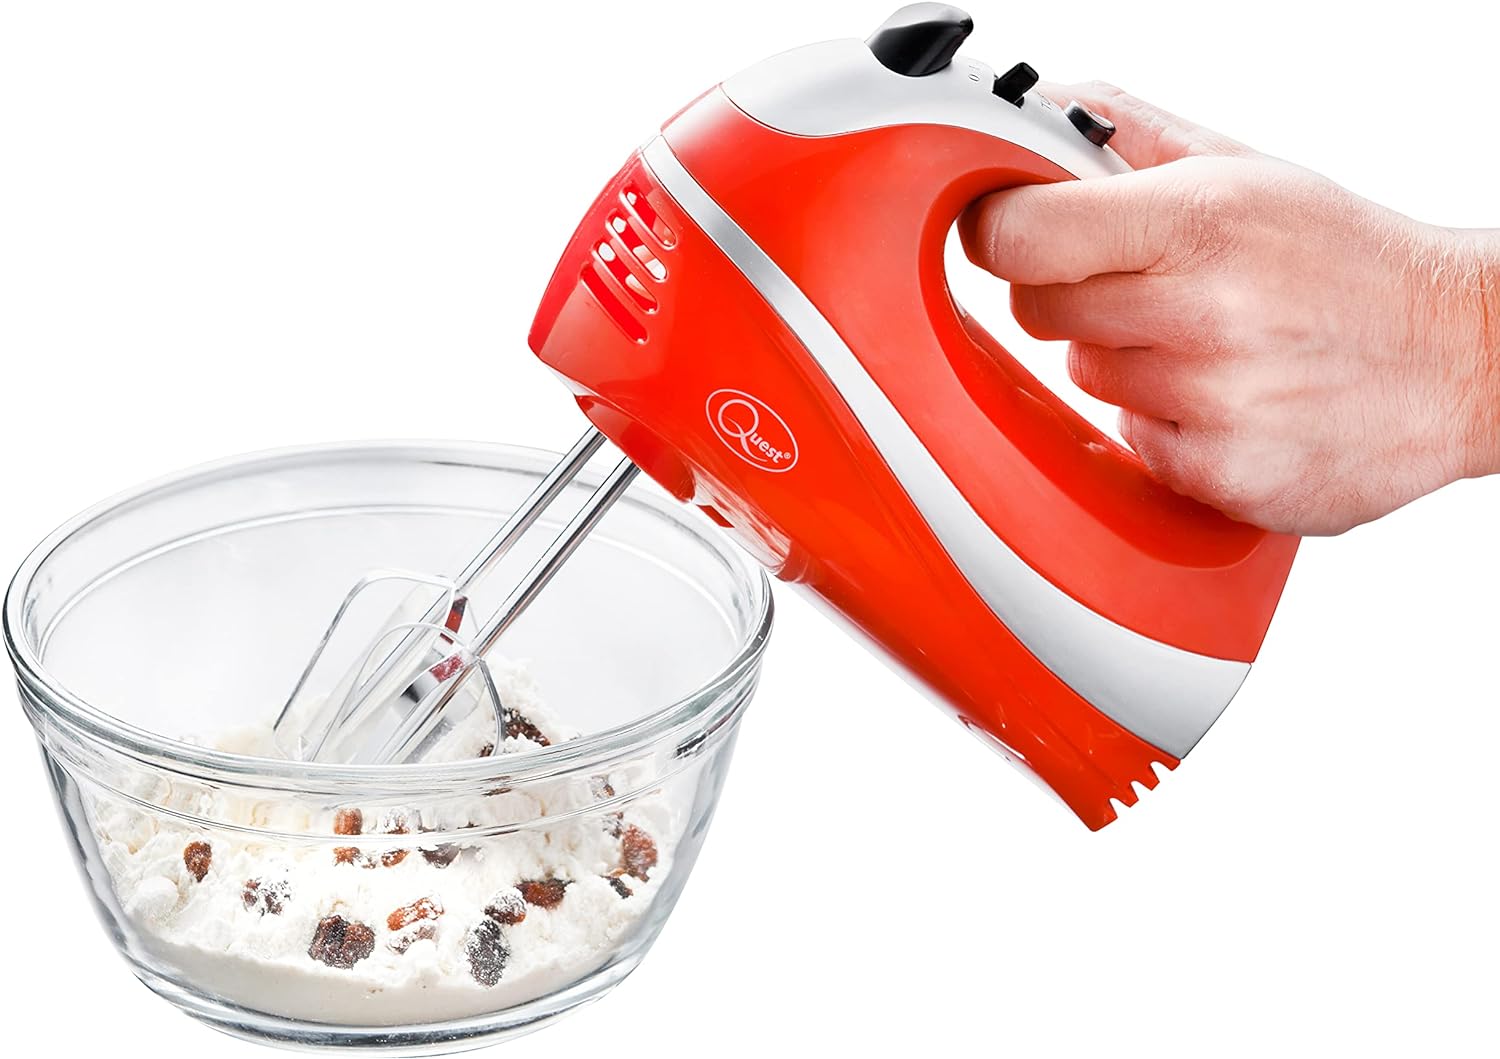 Quest 35820 Electric Hand Mixer / Complete With Chrome Beaters, Dough Hooks & Balloon Whisk / 5 Speed With Turbo Function / 300W / Red Colour - Amazing Gadgets Outlet